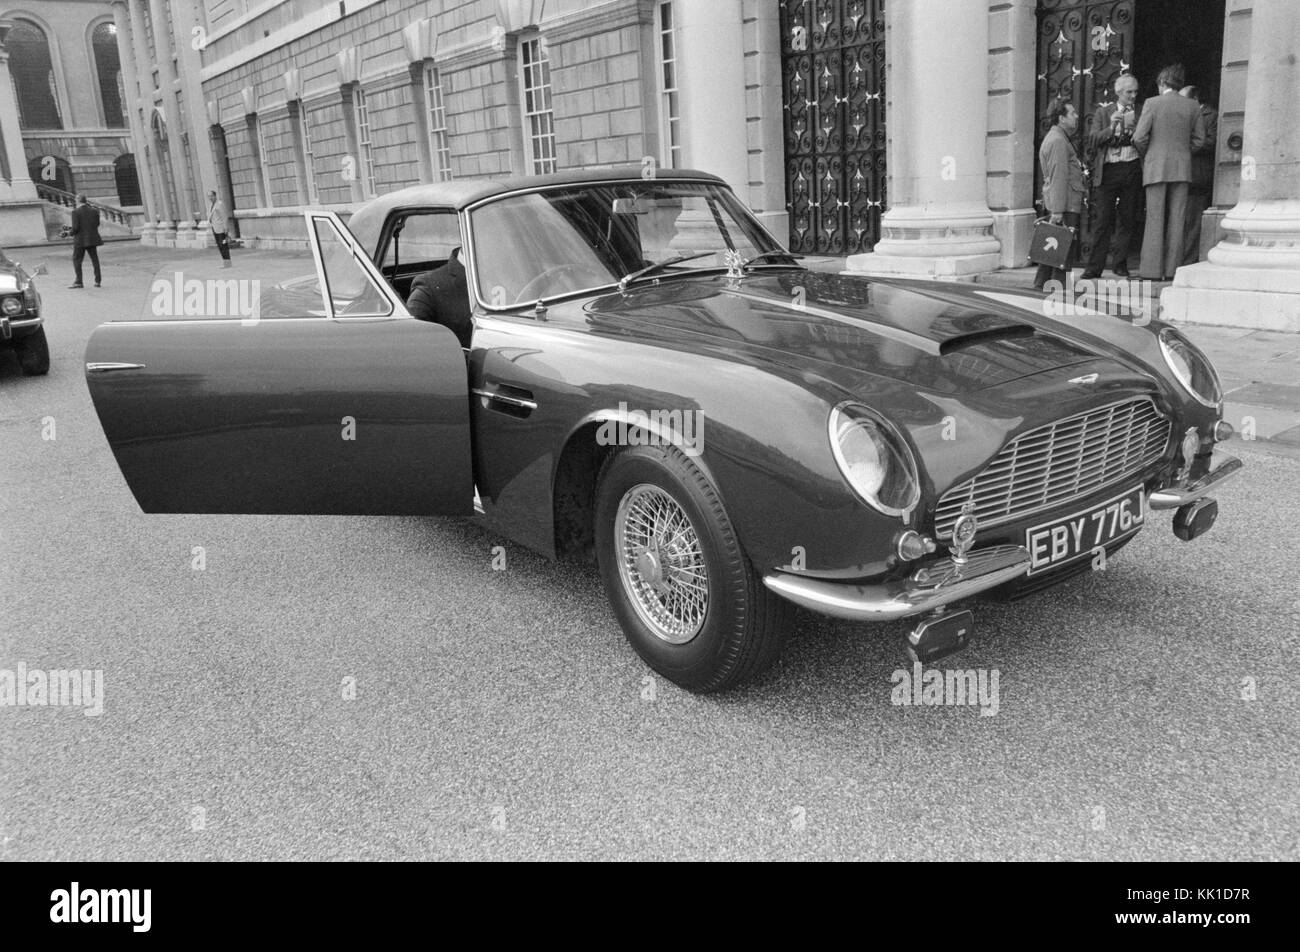 Prince Charles's 1969 Aston Martin DB6 Volante, registration number EBY 776J, parked outside Greenwich naval College in London, during a visit by the Prince in 1975. This car is still owned by Prince Charles, and was used by Prince William and Kate Middleton after their wedding in 2011. Stock Photo